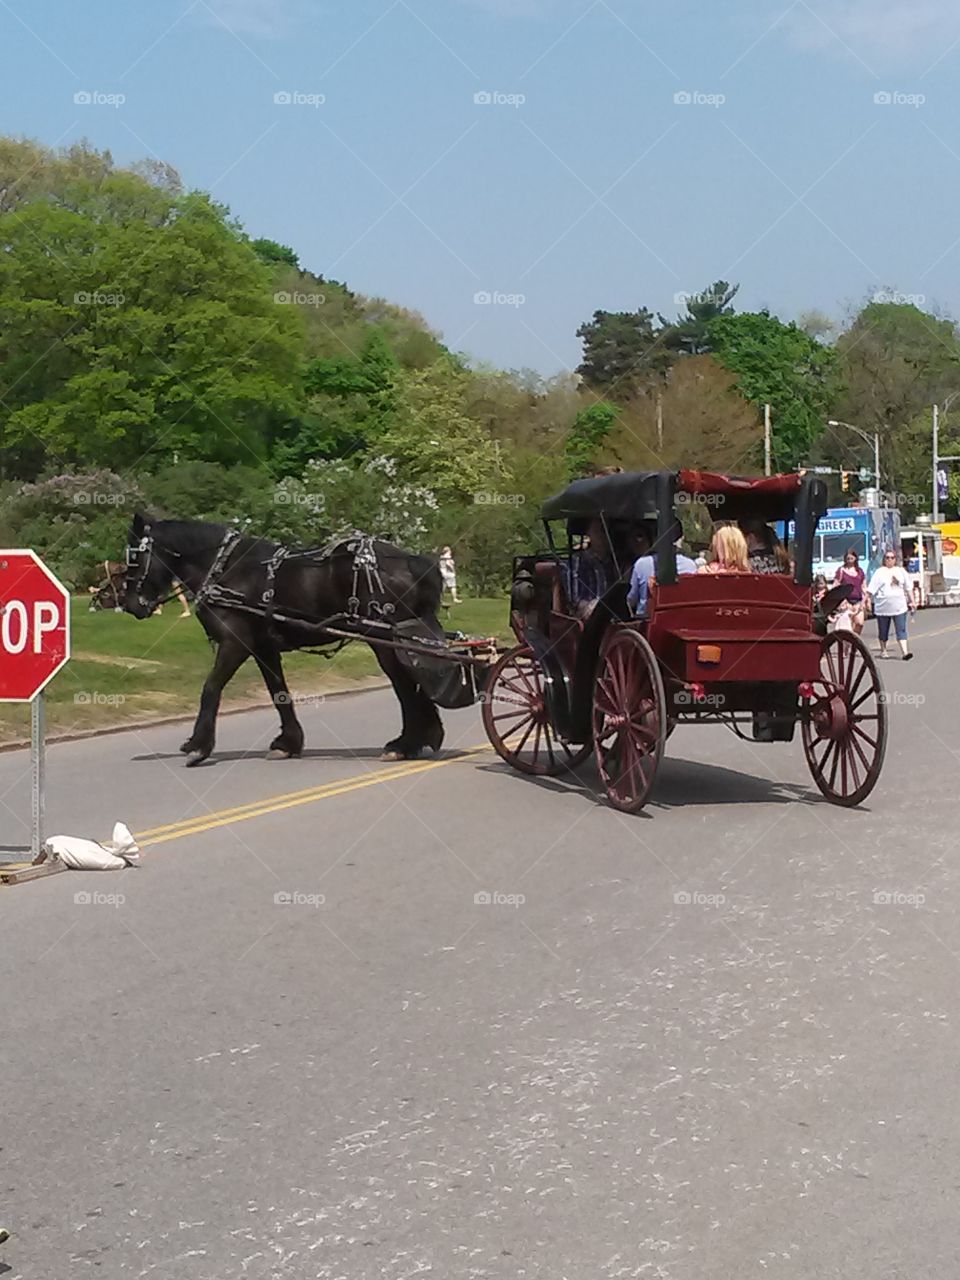 Horse And Carriage Ride Thru The Park. A horse carriage ride on the weekend of Art In The Park on Mothers' Day 2015 